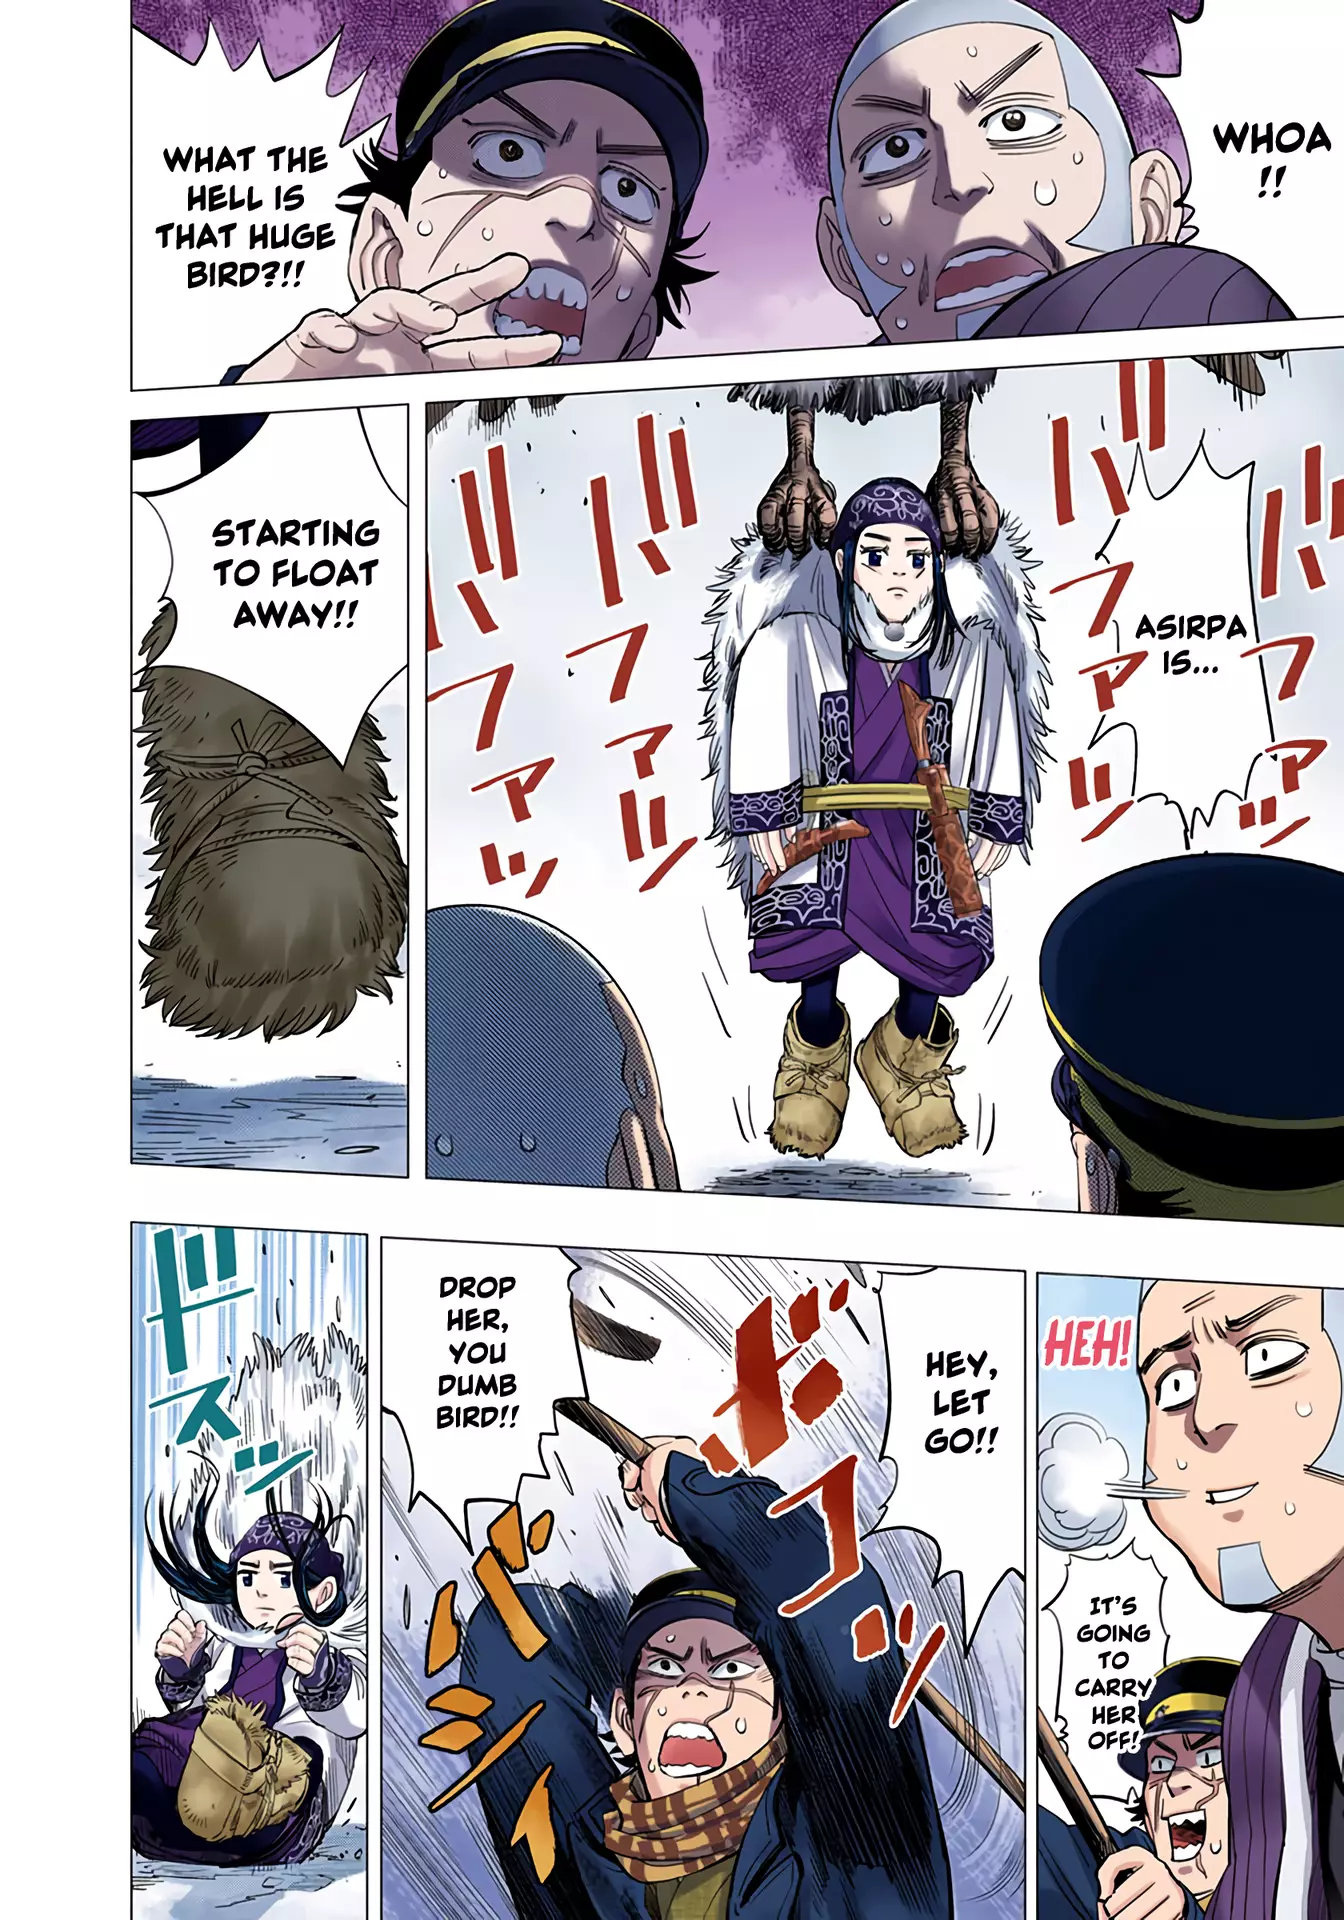 Golden Kamuy - Digital Colored Comics - 32 page 14-ae024b33